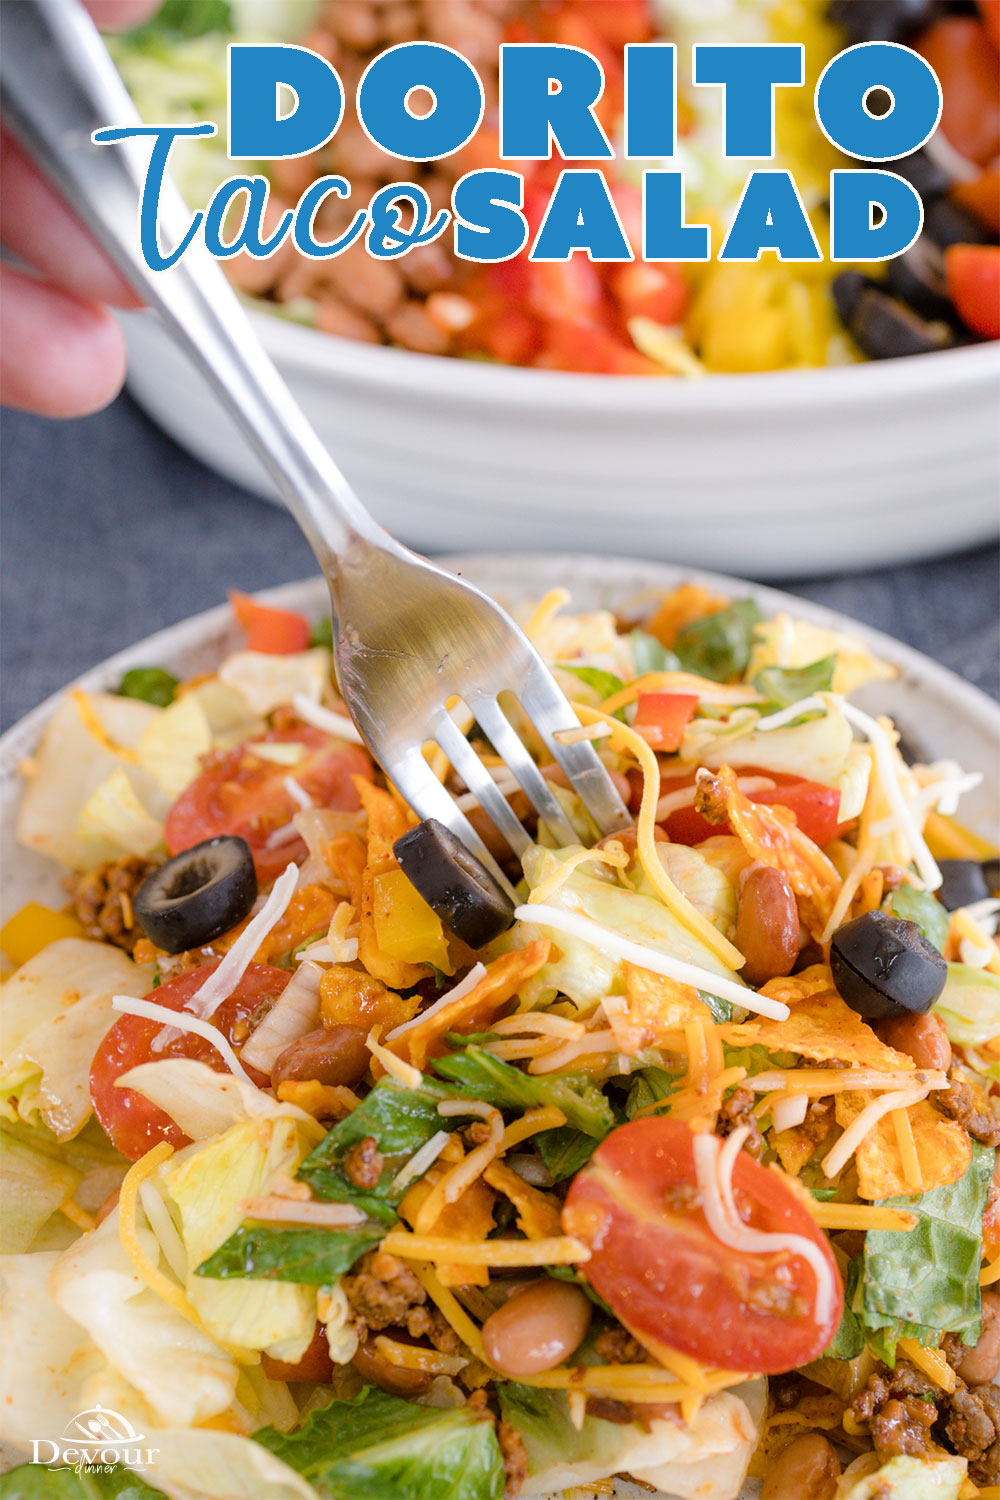 Your family will love this tossed Dorito Taco Salad Recipe loaded with so many yummy flavors. A Neighborhood Winning Recipe and crowd pleaser! Perfect for Pot Lucks at your next BBQ or just a summer meal when you don't want to heat up the house. Easy to make direction for the Instant Pot or Stove Top. #devourdinner #instantpot #instantpotrecipe #Tacosalad #doritotacosalad #doritotacosaladrecipe #yum #yummy #recipe #recipes #easydinner #potluck #bbq #summersalad #hamburger #taco #tacotuesday